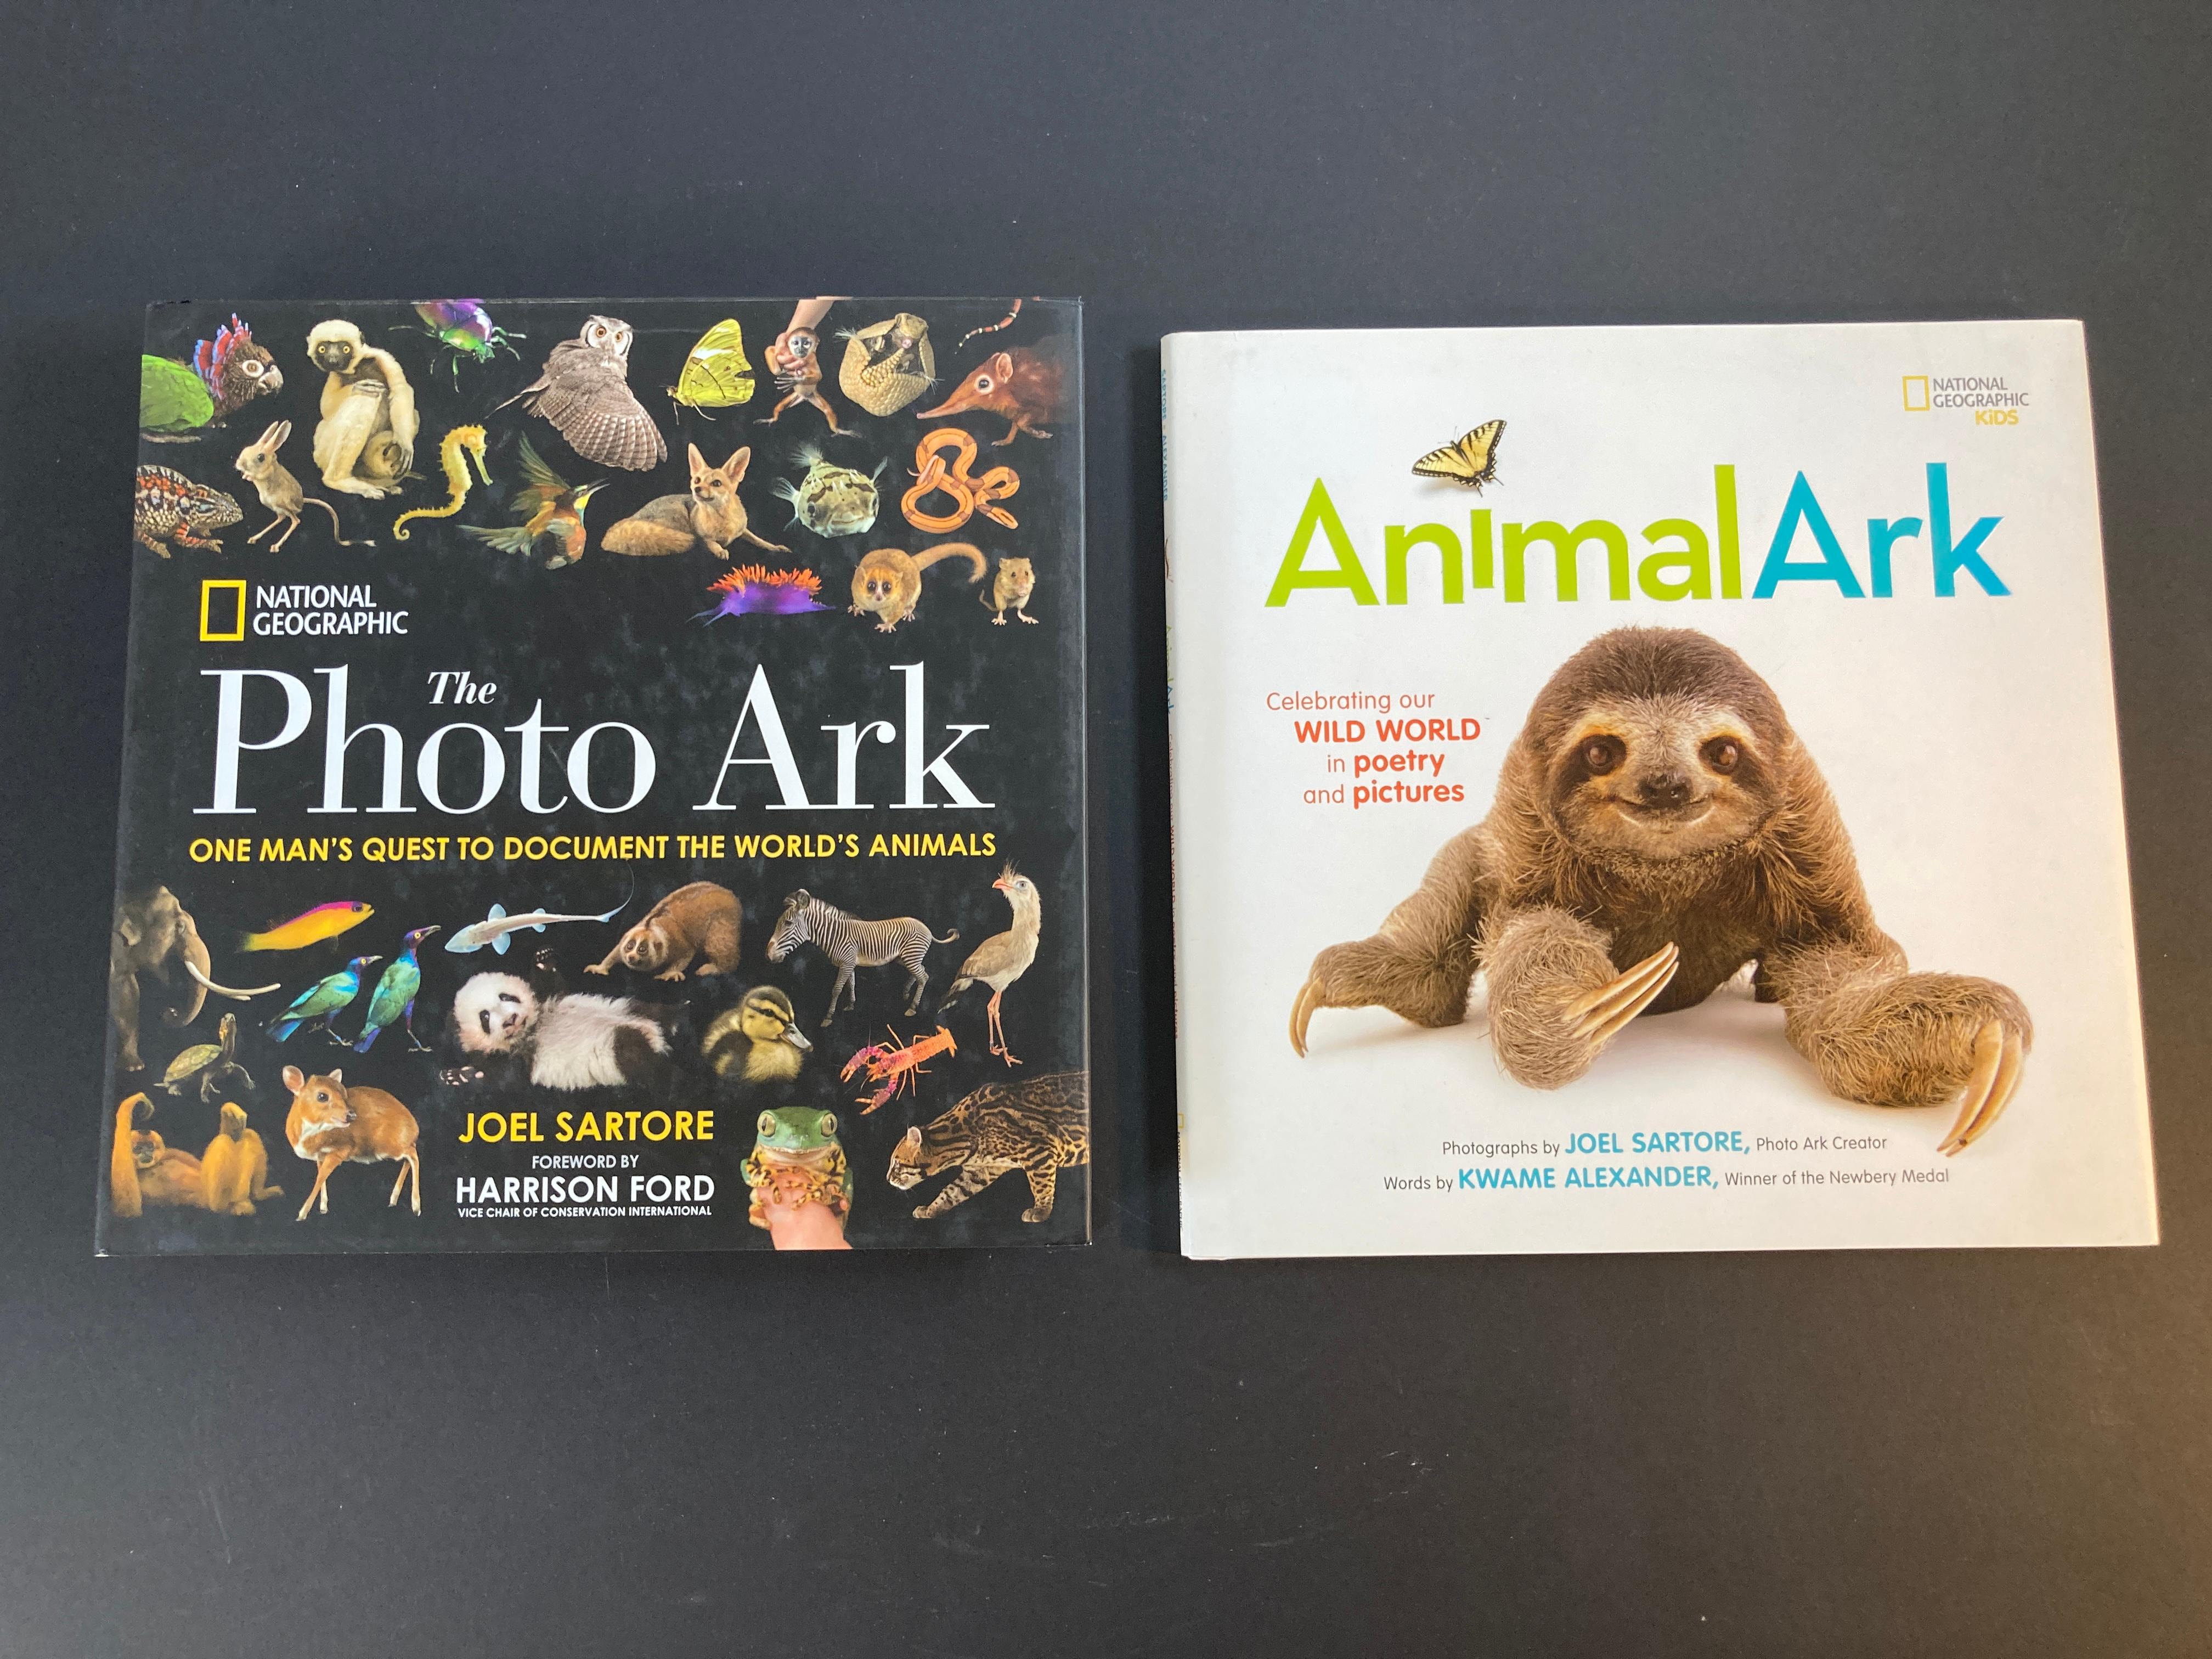 National Geographic The Photo Ark: One Man's Quest to Document the World's Animals.
Animal Ark: Celebrating our Wild World in Poetry and Pictures (National Geographic Kids) Hardcover – February 14, 2017
Synopsis:
The lush and unique photography